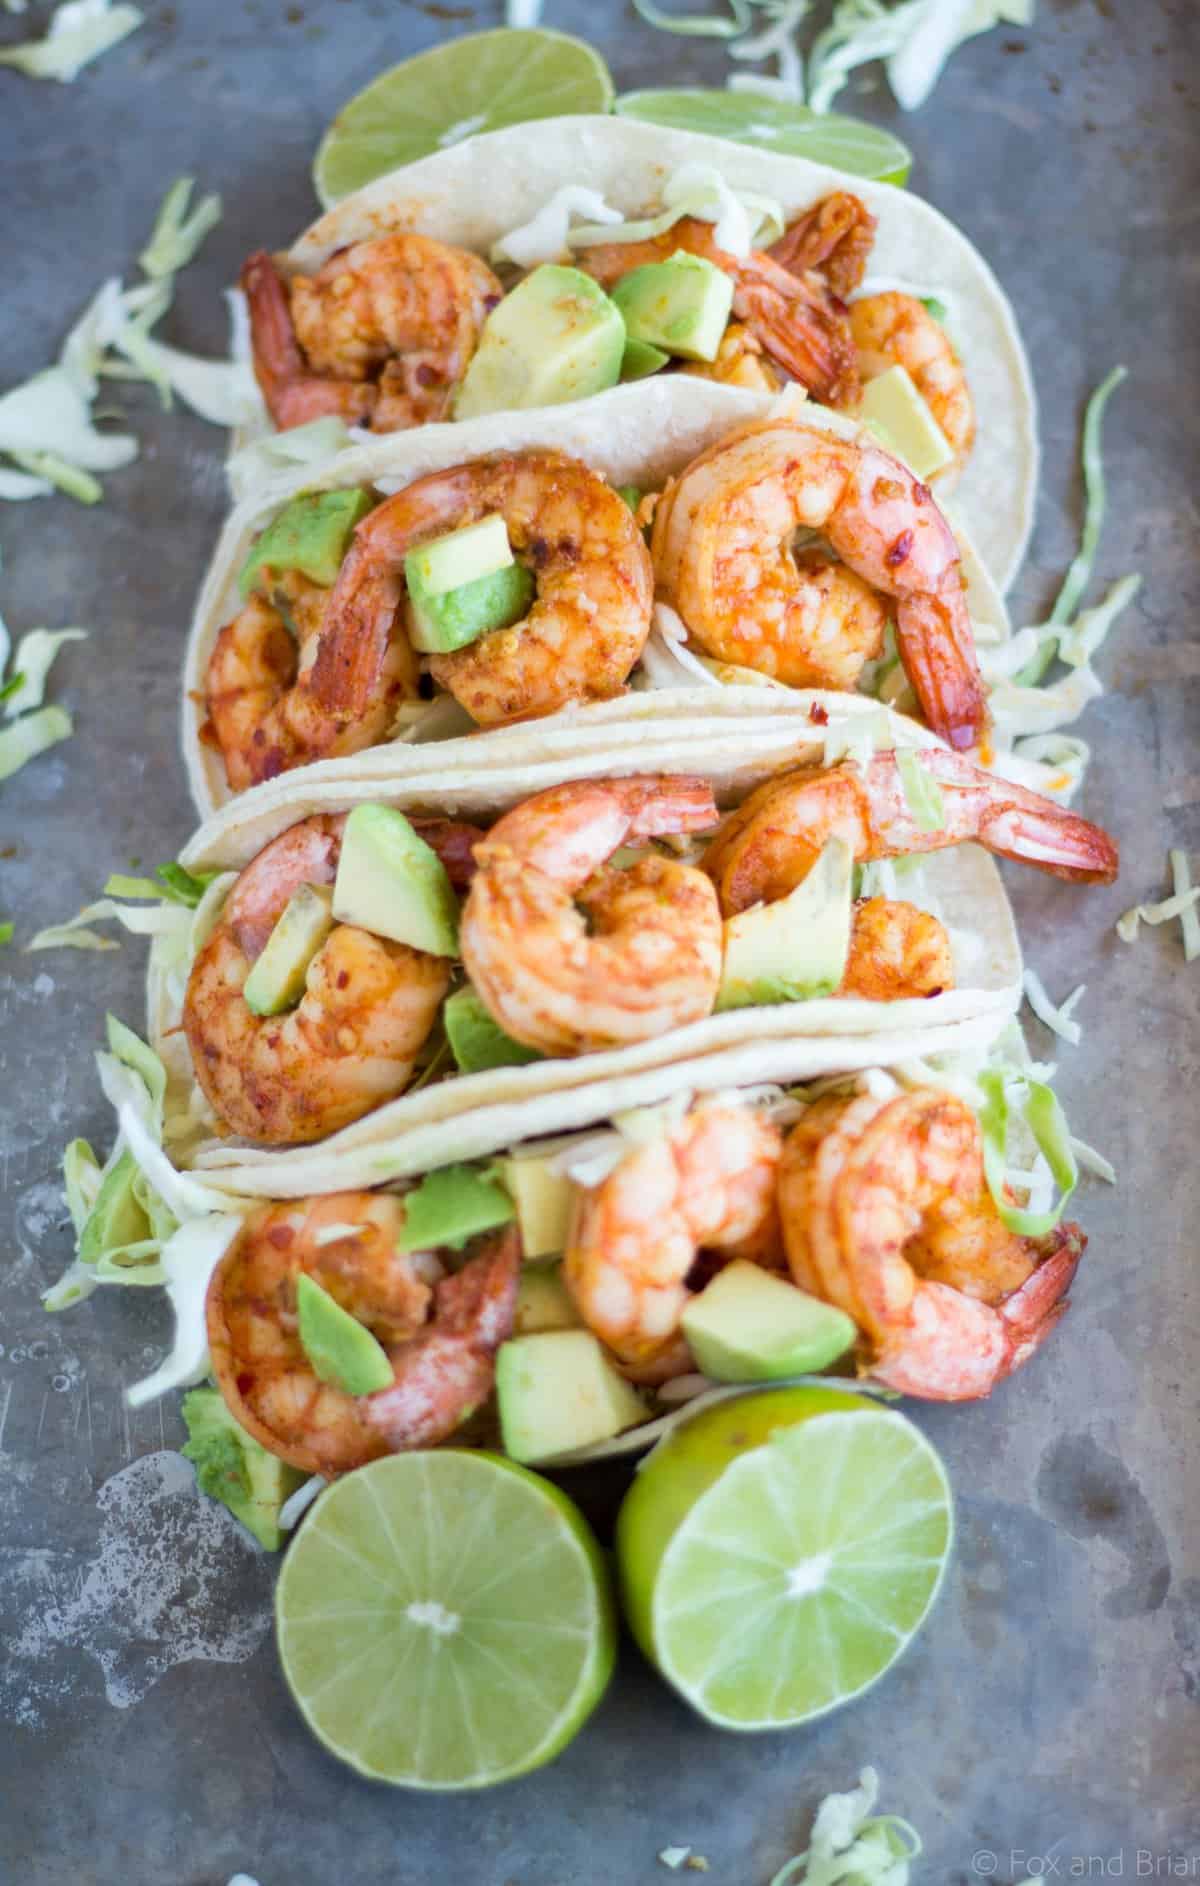 Chili Lime Shrimp Tacos from Fox and Briar